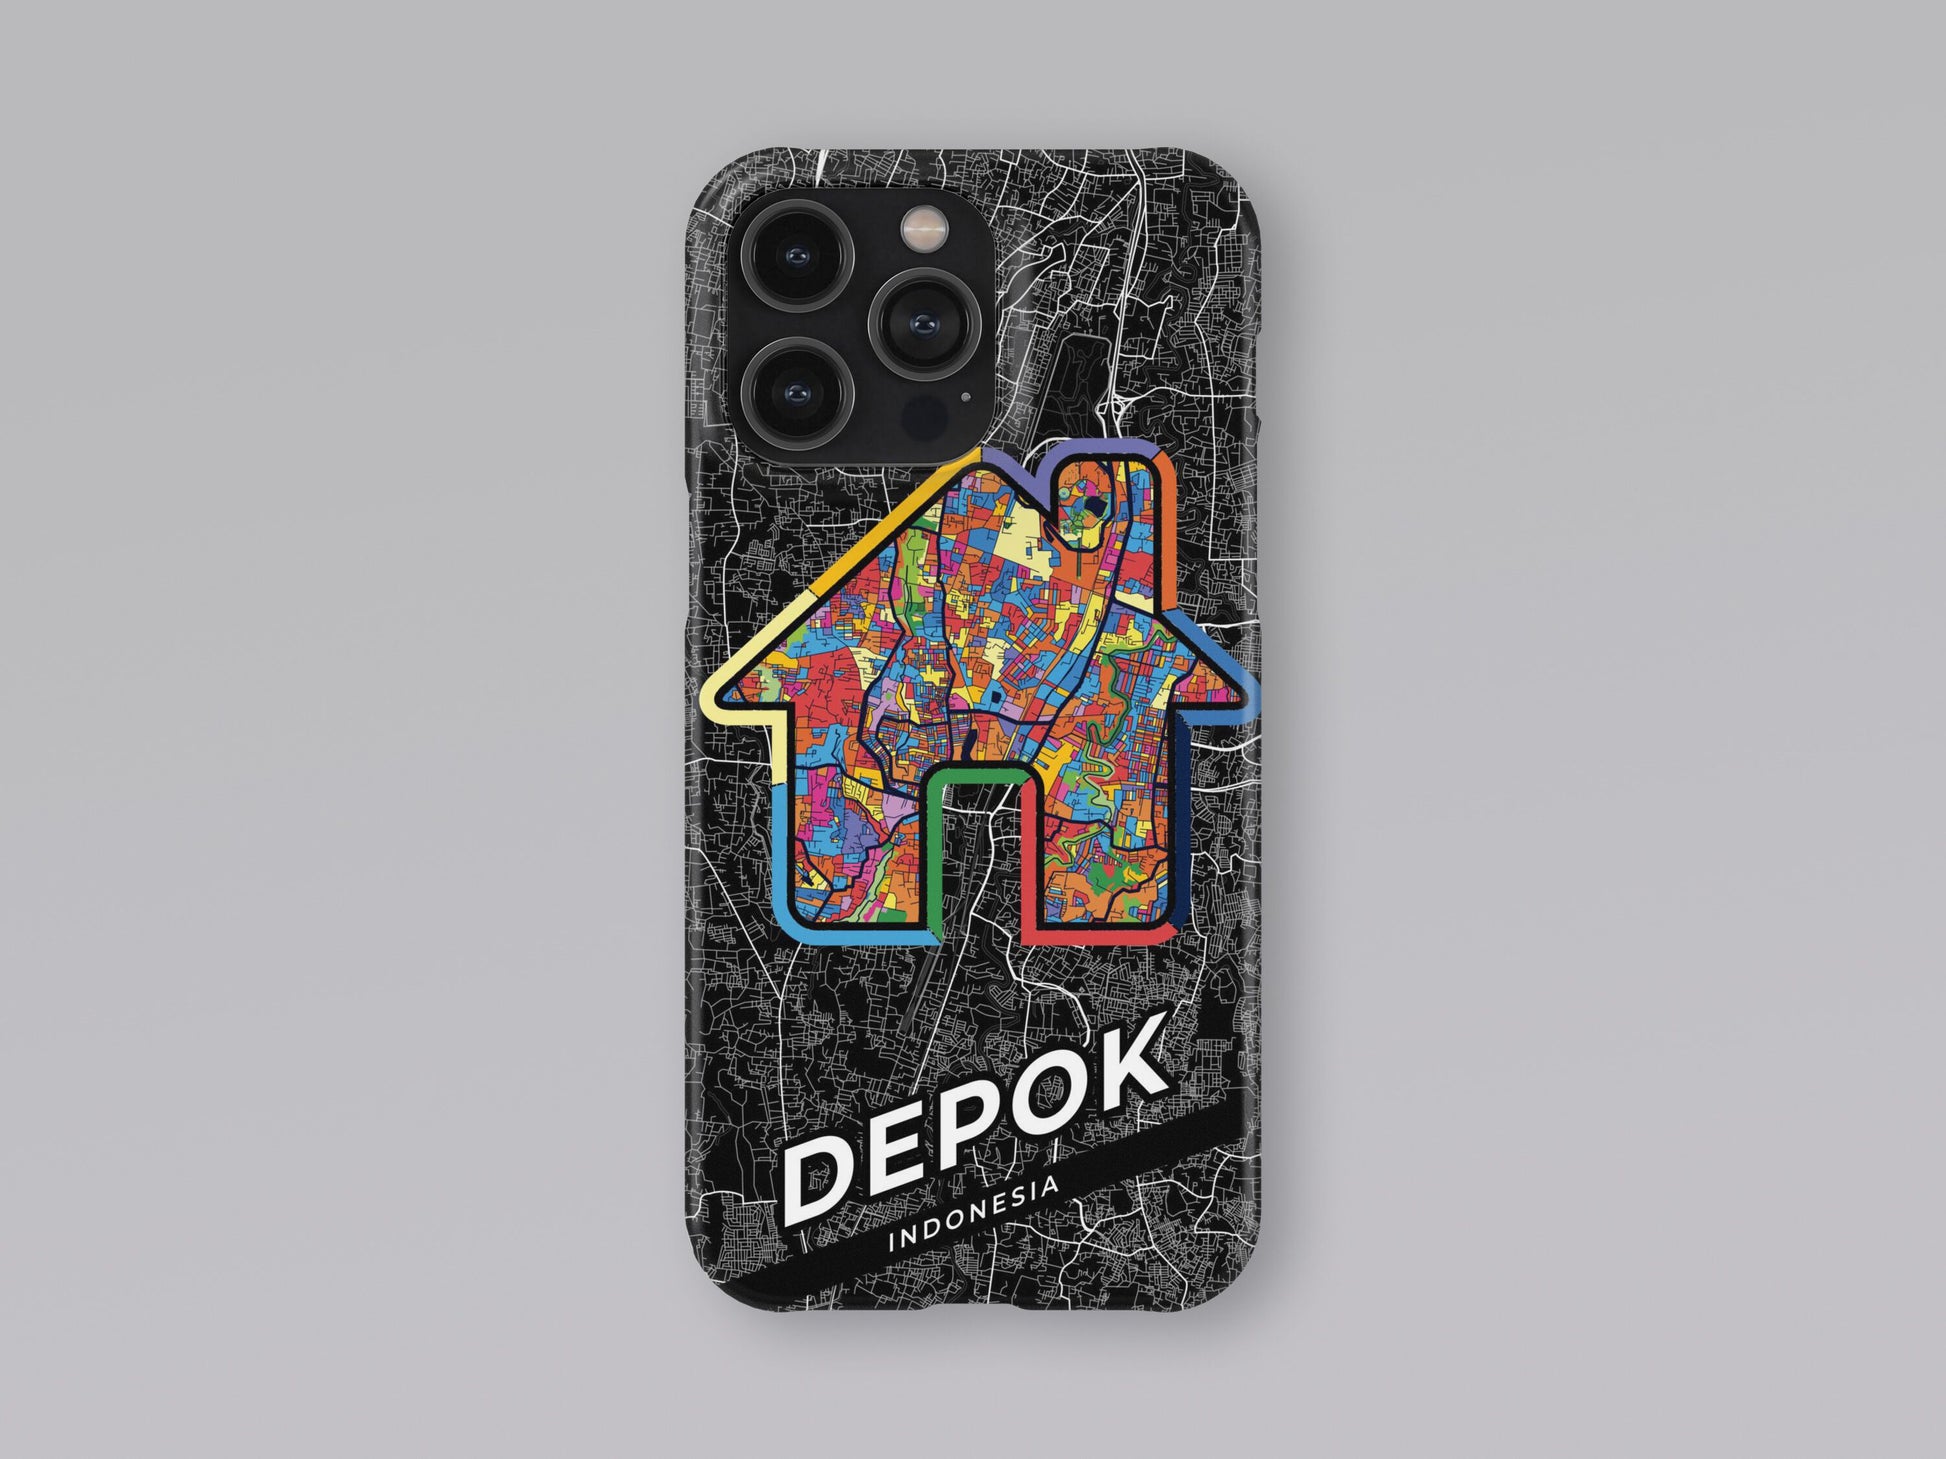 Depok Indonesia slim phone case with colorful icon. Birthday, wedding or housewarming gift. Couple match cases. 3